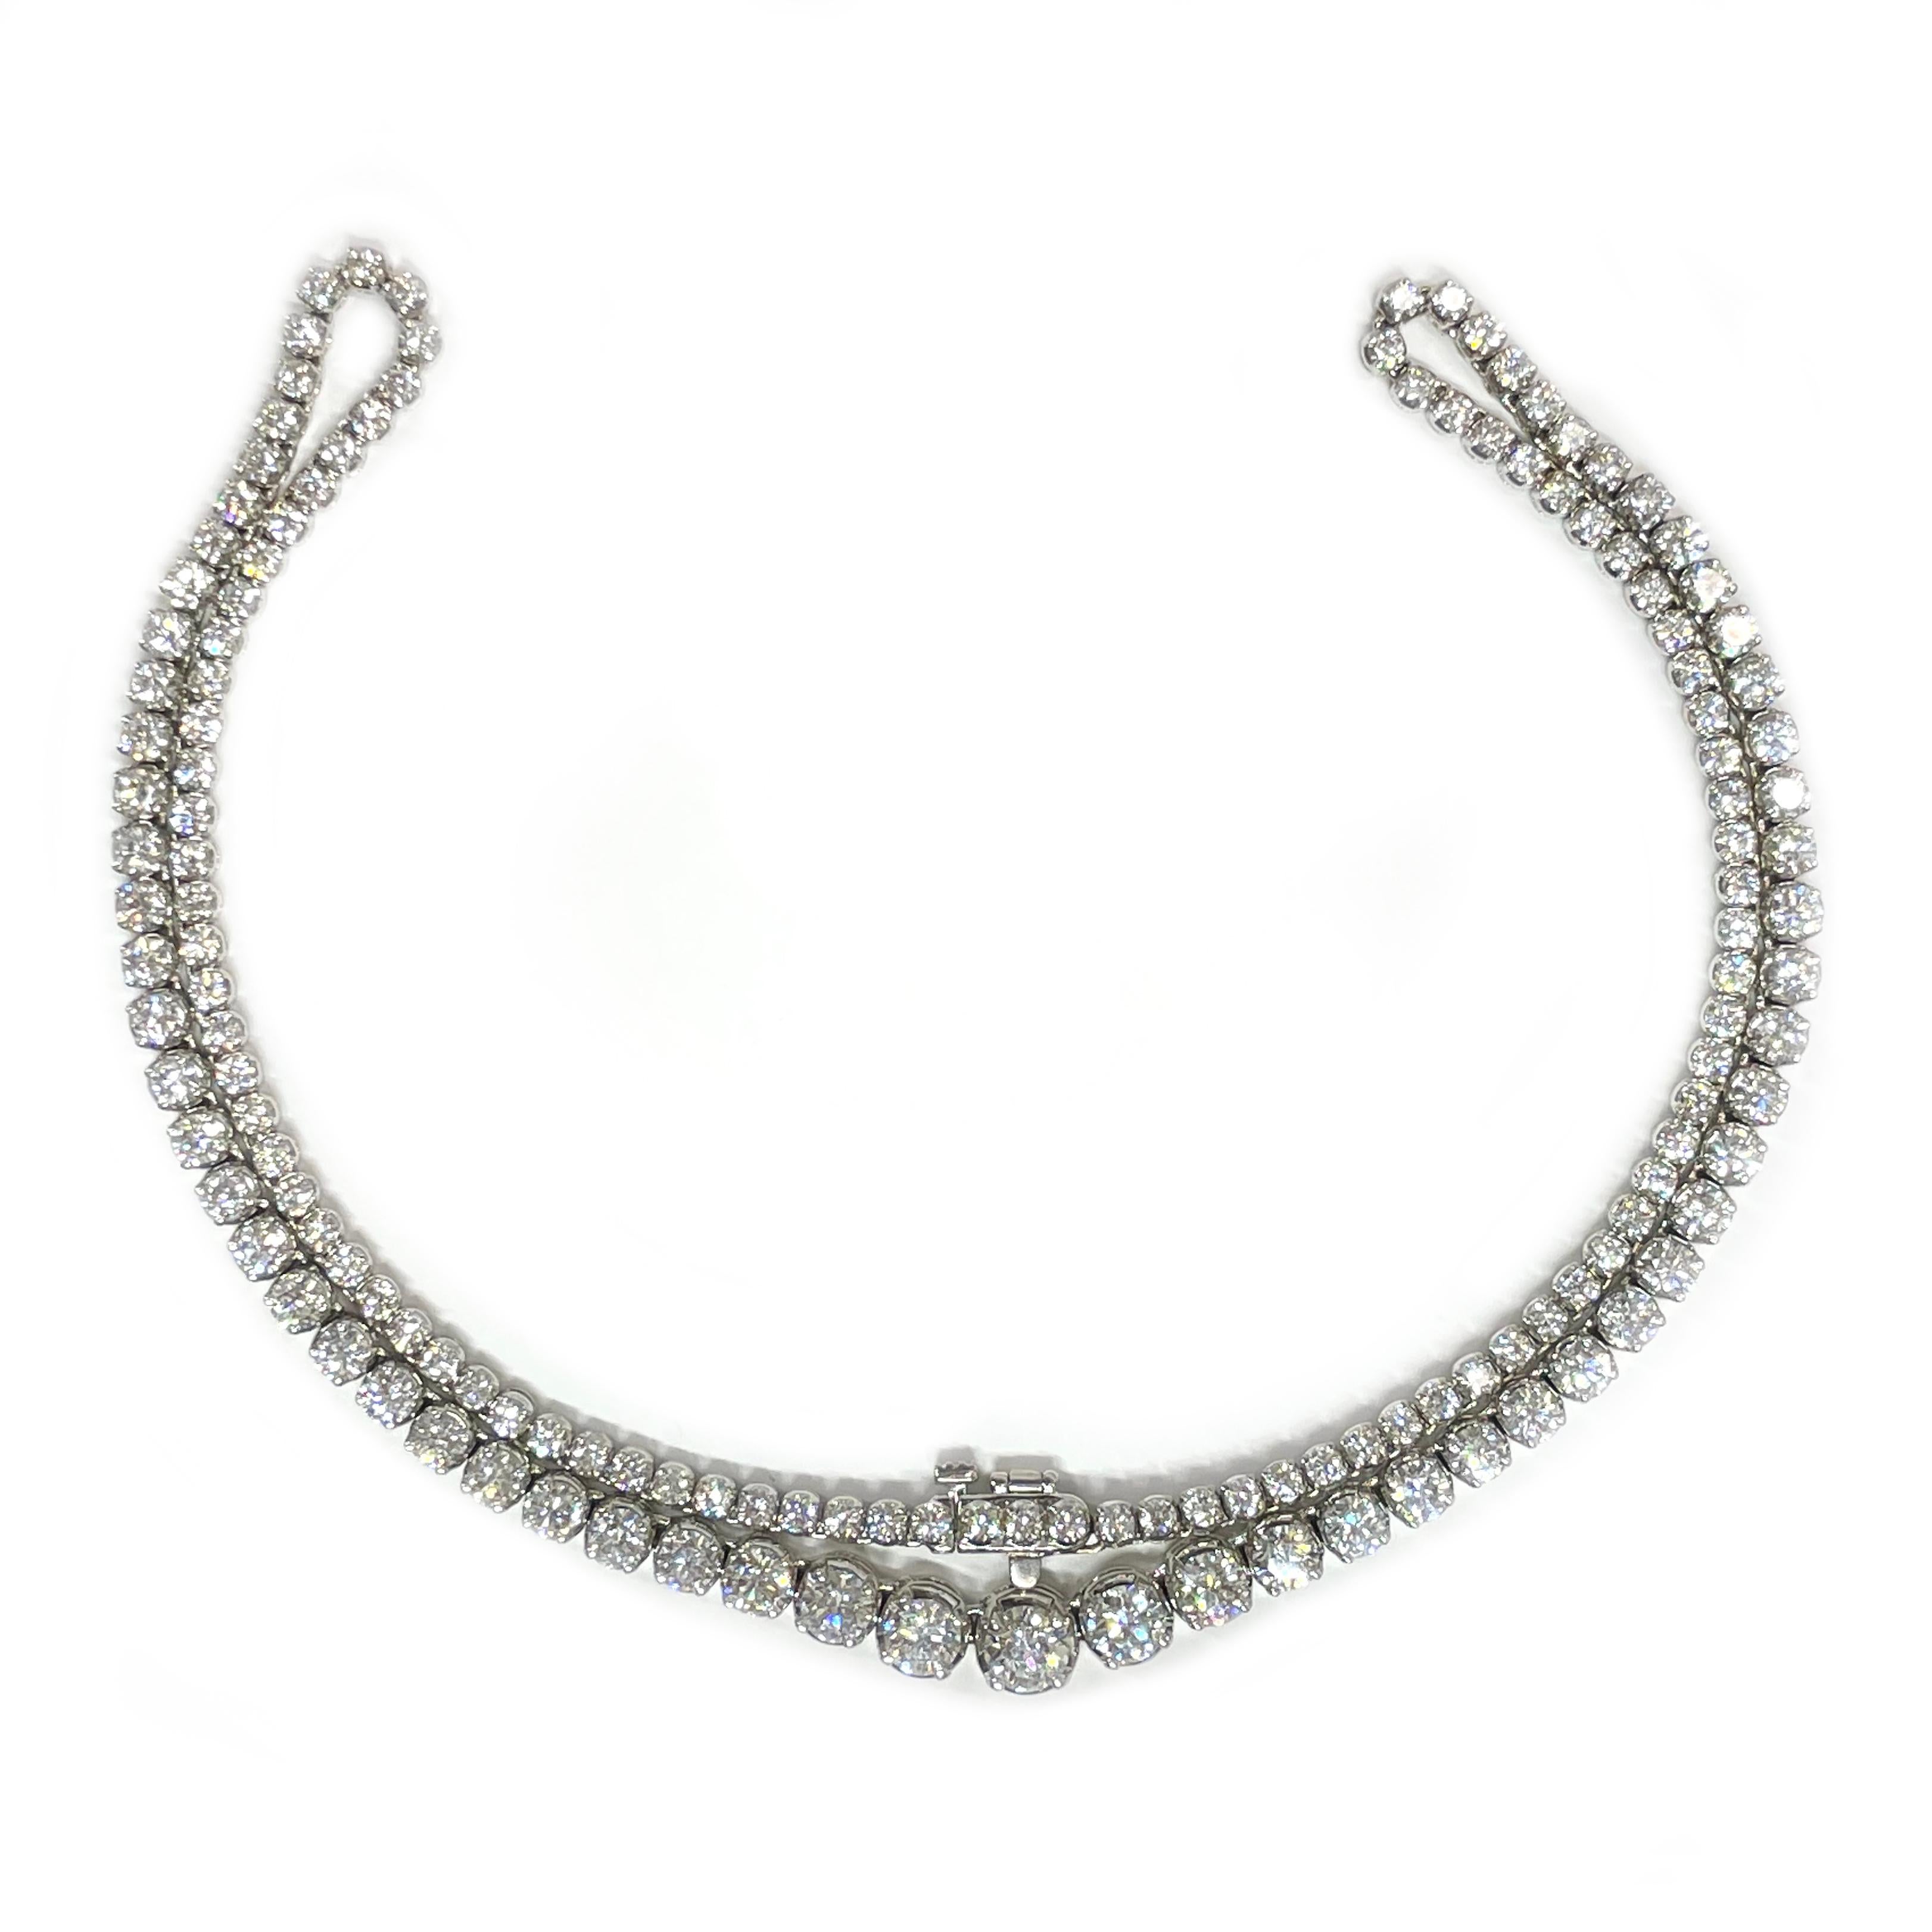 Contemporary White Gold Diamond Eternity Necklace, 11.75 Carats For Sale